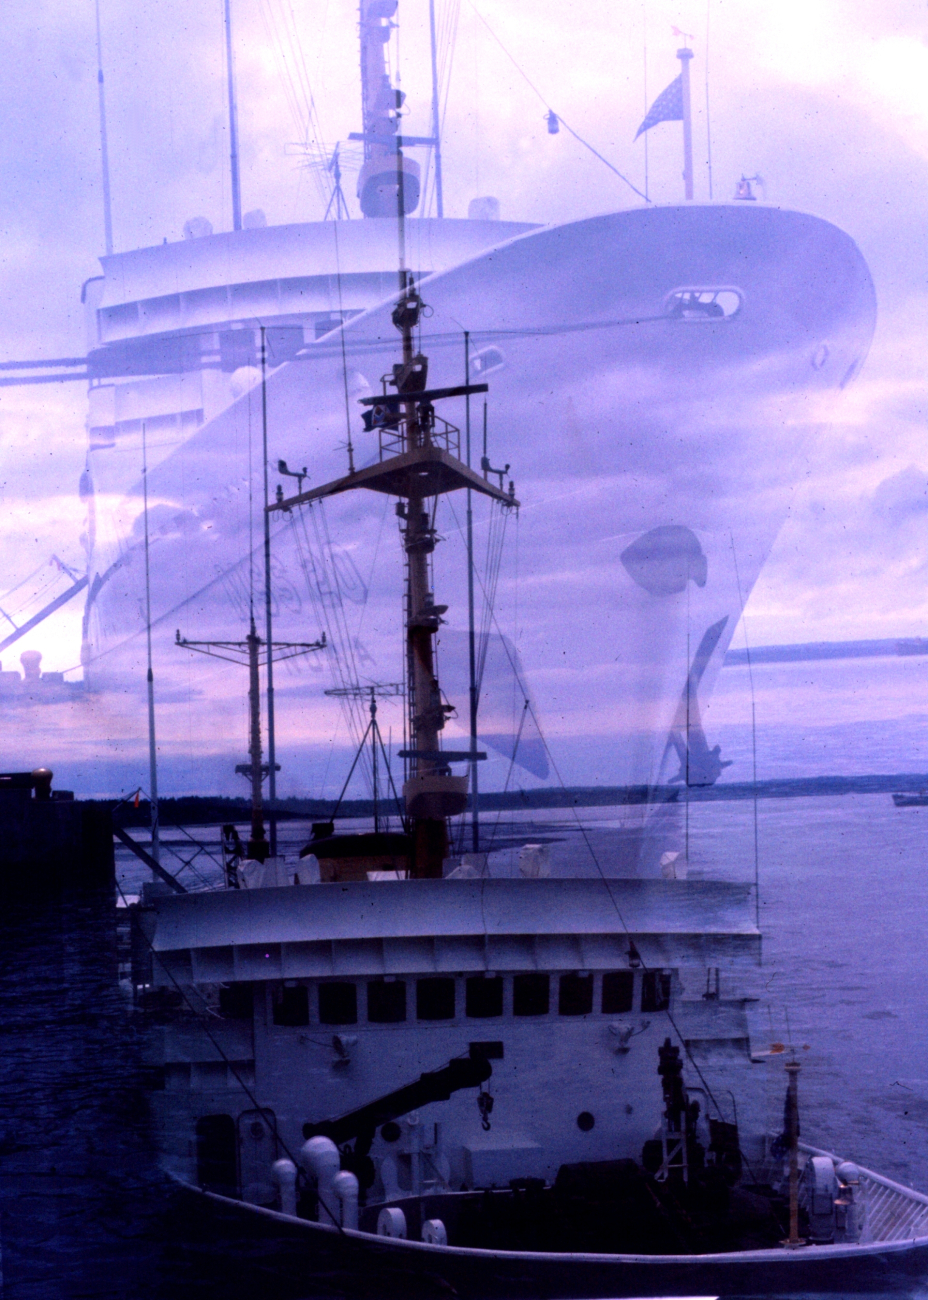 Double exposure of NOAA Ship FAIRWEATHER taken from same locationat high and low tide at the pier at Anchorage